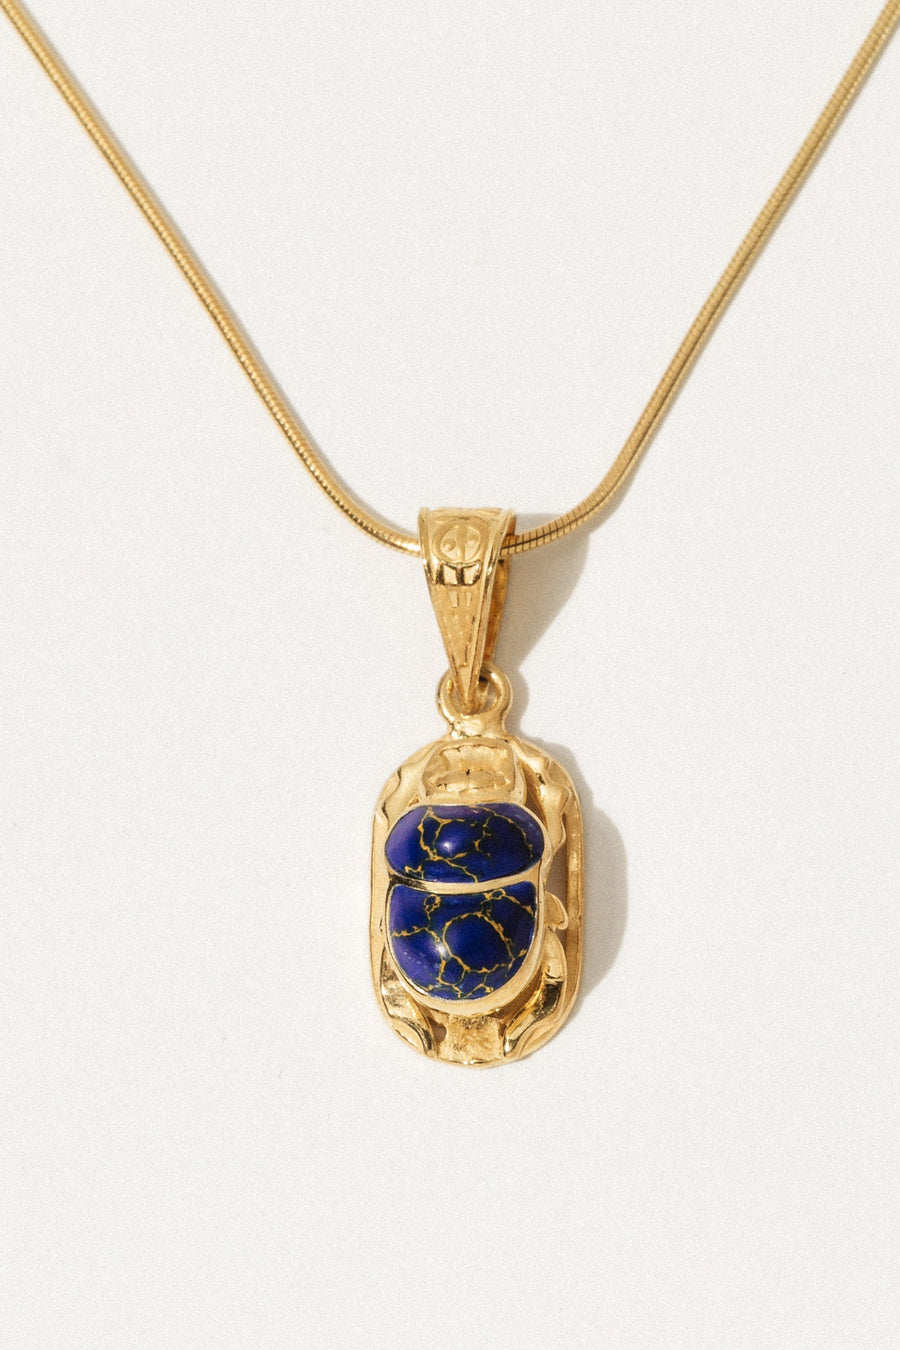 Amina Gad Jewelry Jewelry Gold / 16 inches Lapis Scarab Amulet Necklace